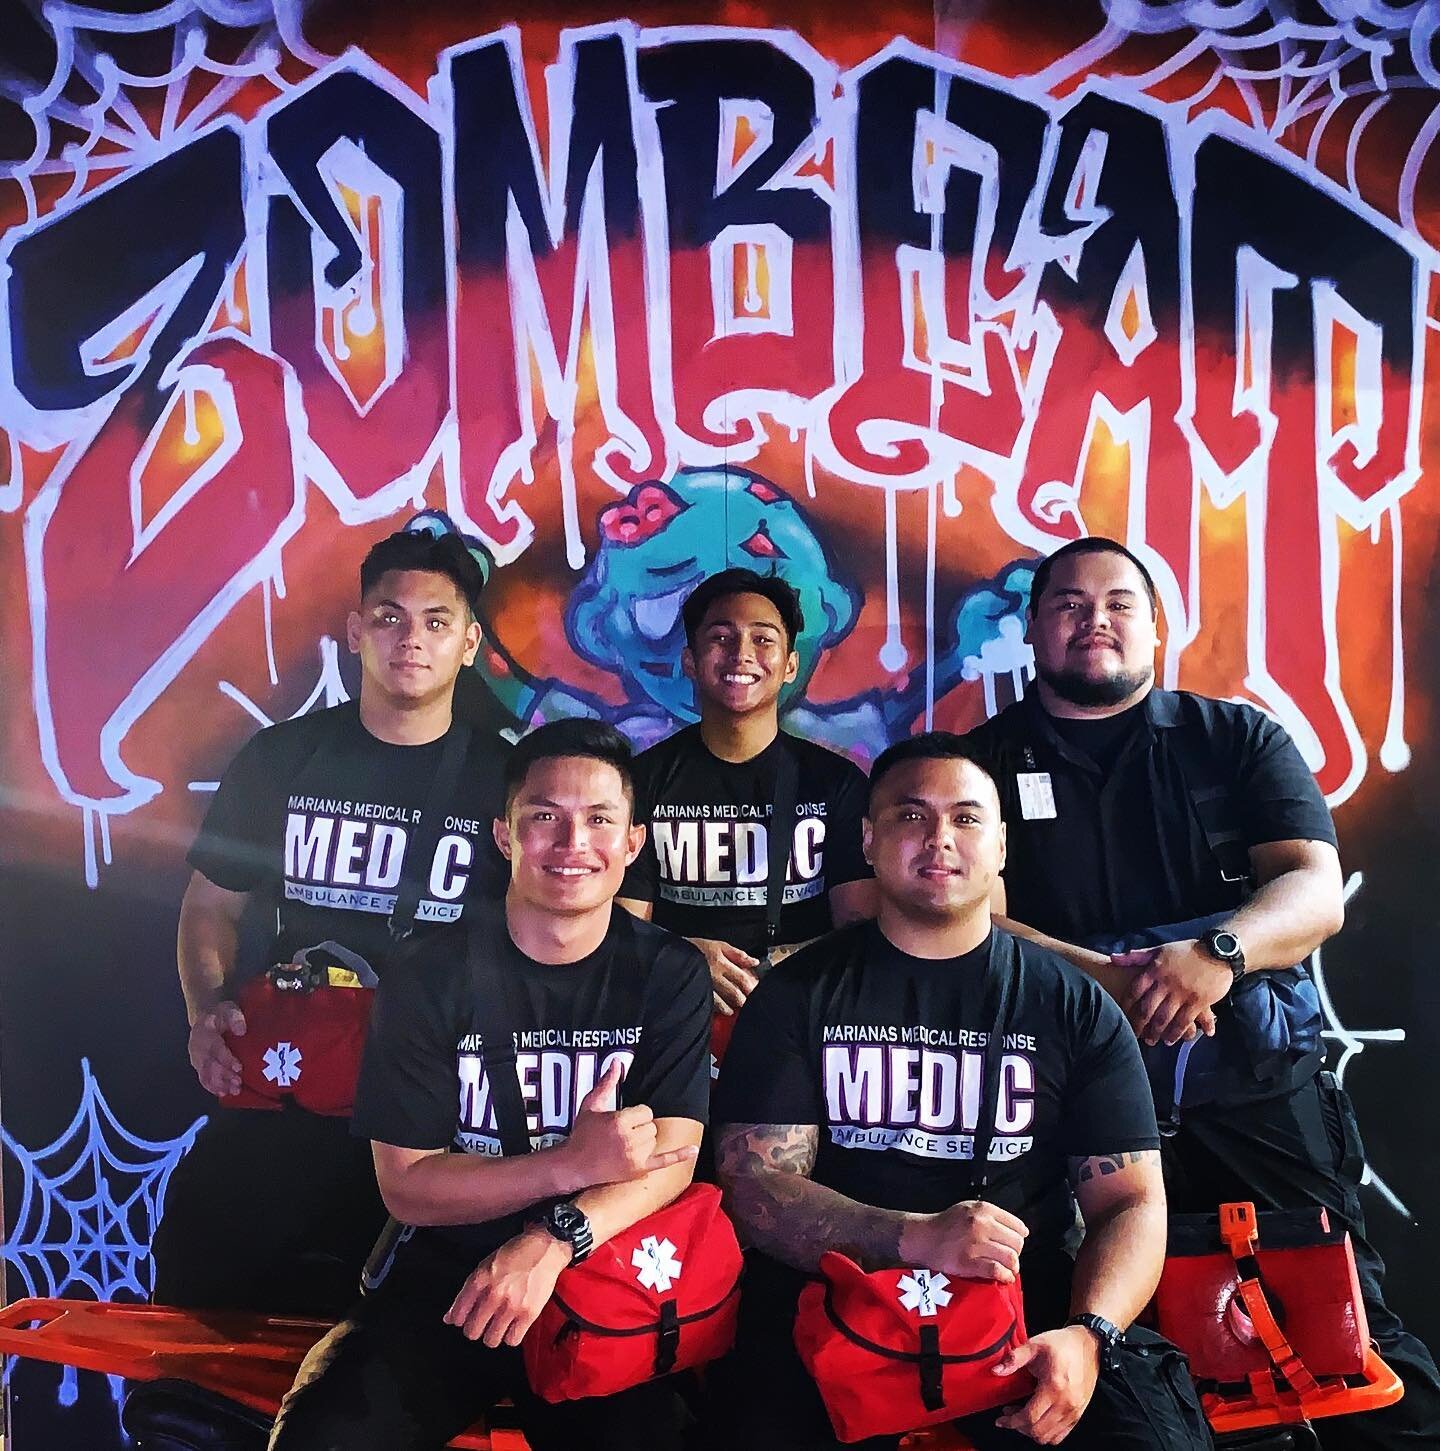 Thank you to @zombeatguam @eifestival @upshift.ent for hosting another successful event. We&rsquo;re always happy to support and provide medical coverage to people of Guam! 
#zombeat #eif #electricislandfestival #nremt #medicalstandby #mmrguam